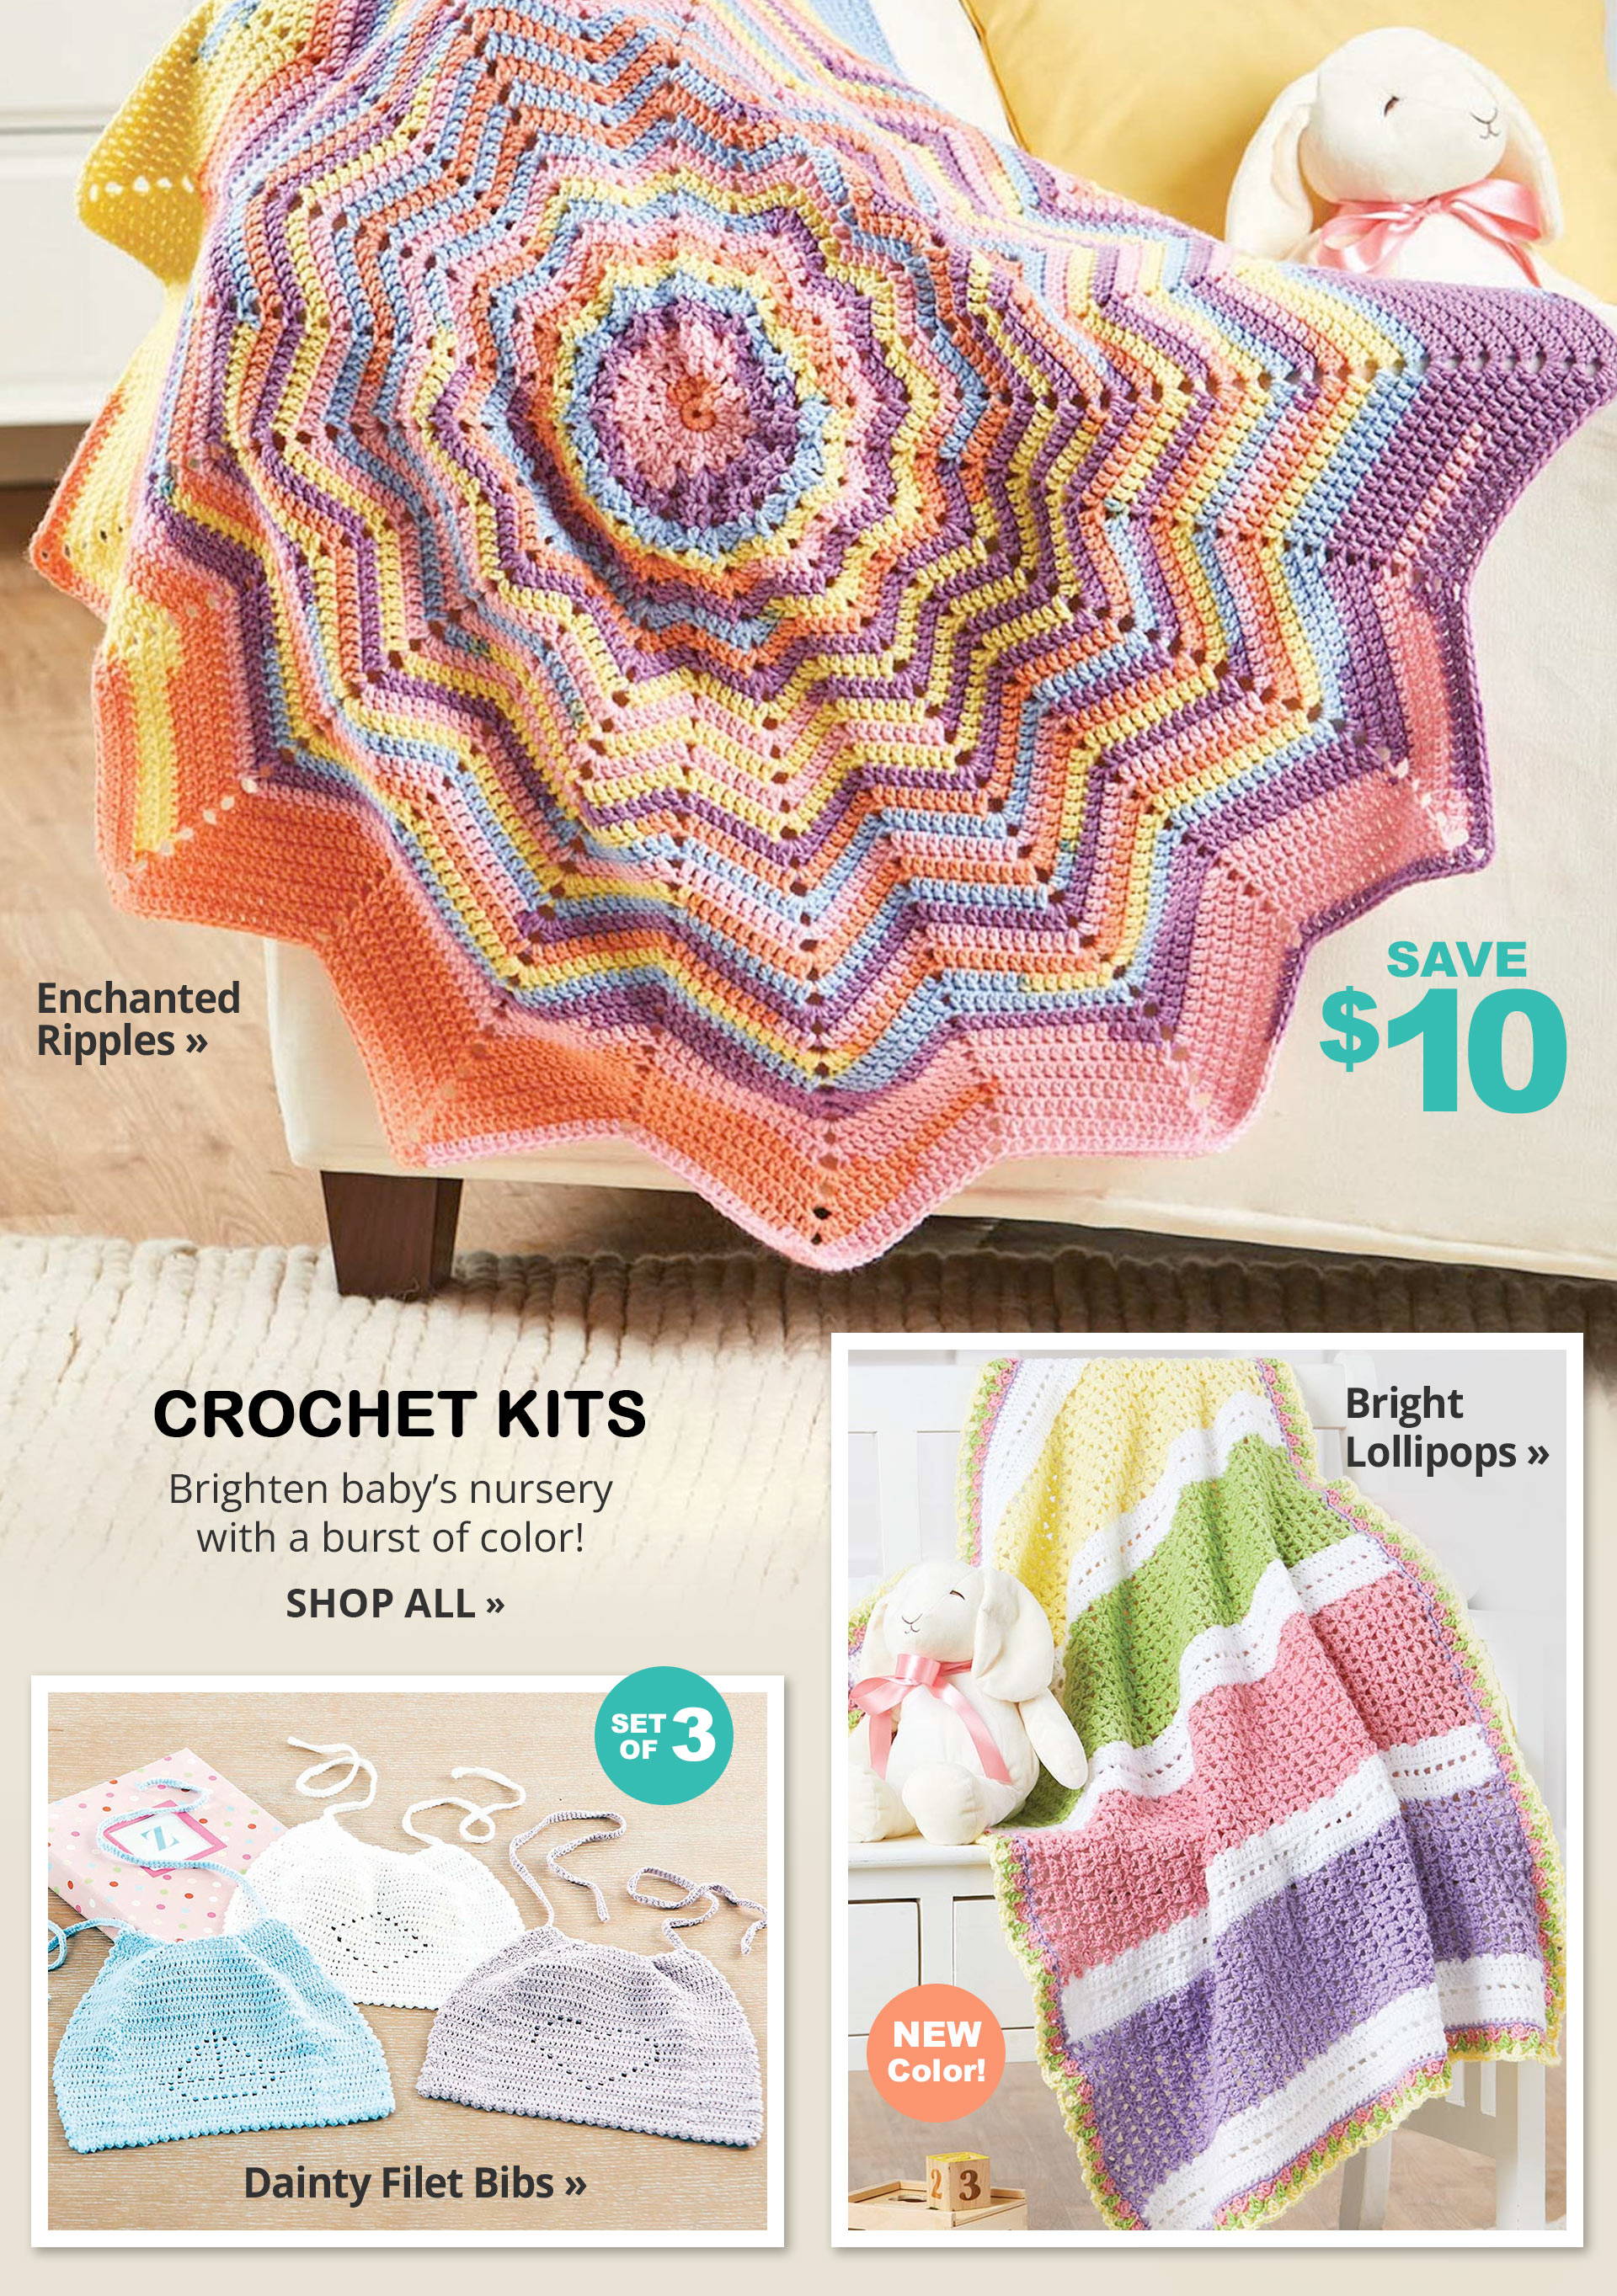 CROCHET KITS Brighten baby's nursery with a burst of color! - Enchanted Ripples Save $10 - Dainty Filet Bibs Set of 3 - Bright Lollipops NEW Color!SHOP ALL>>